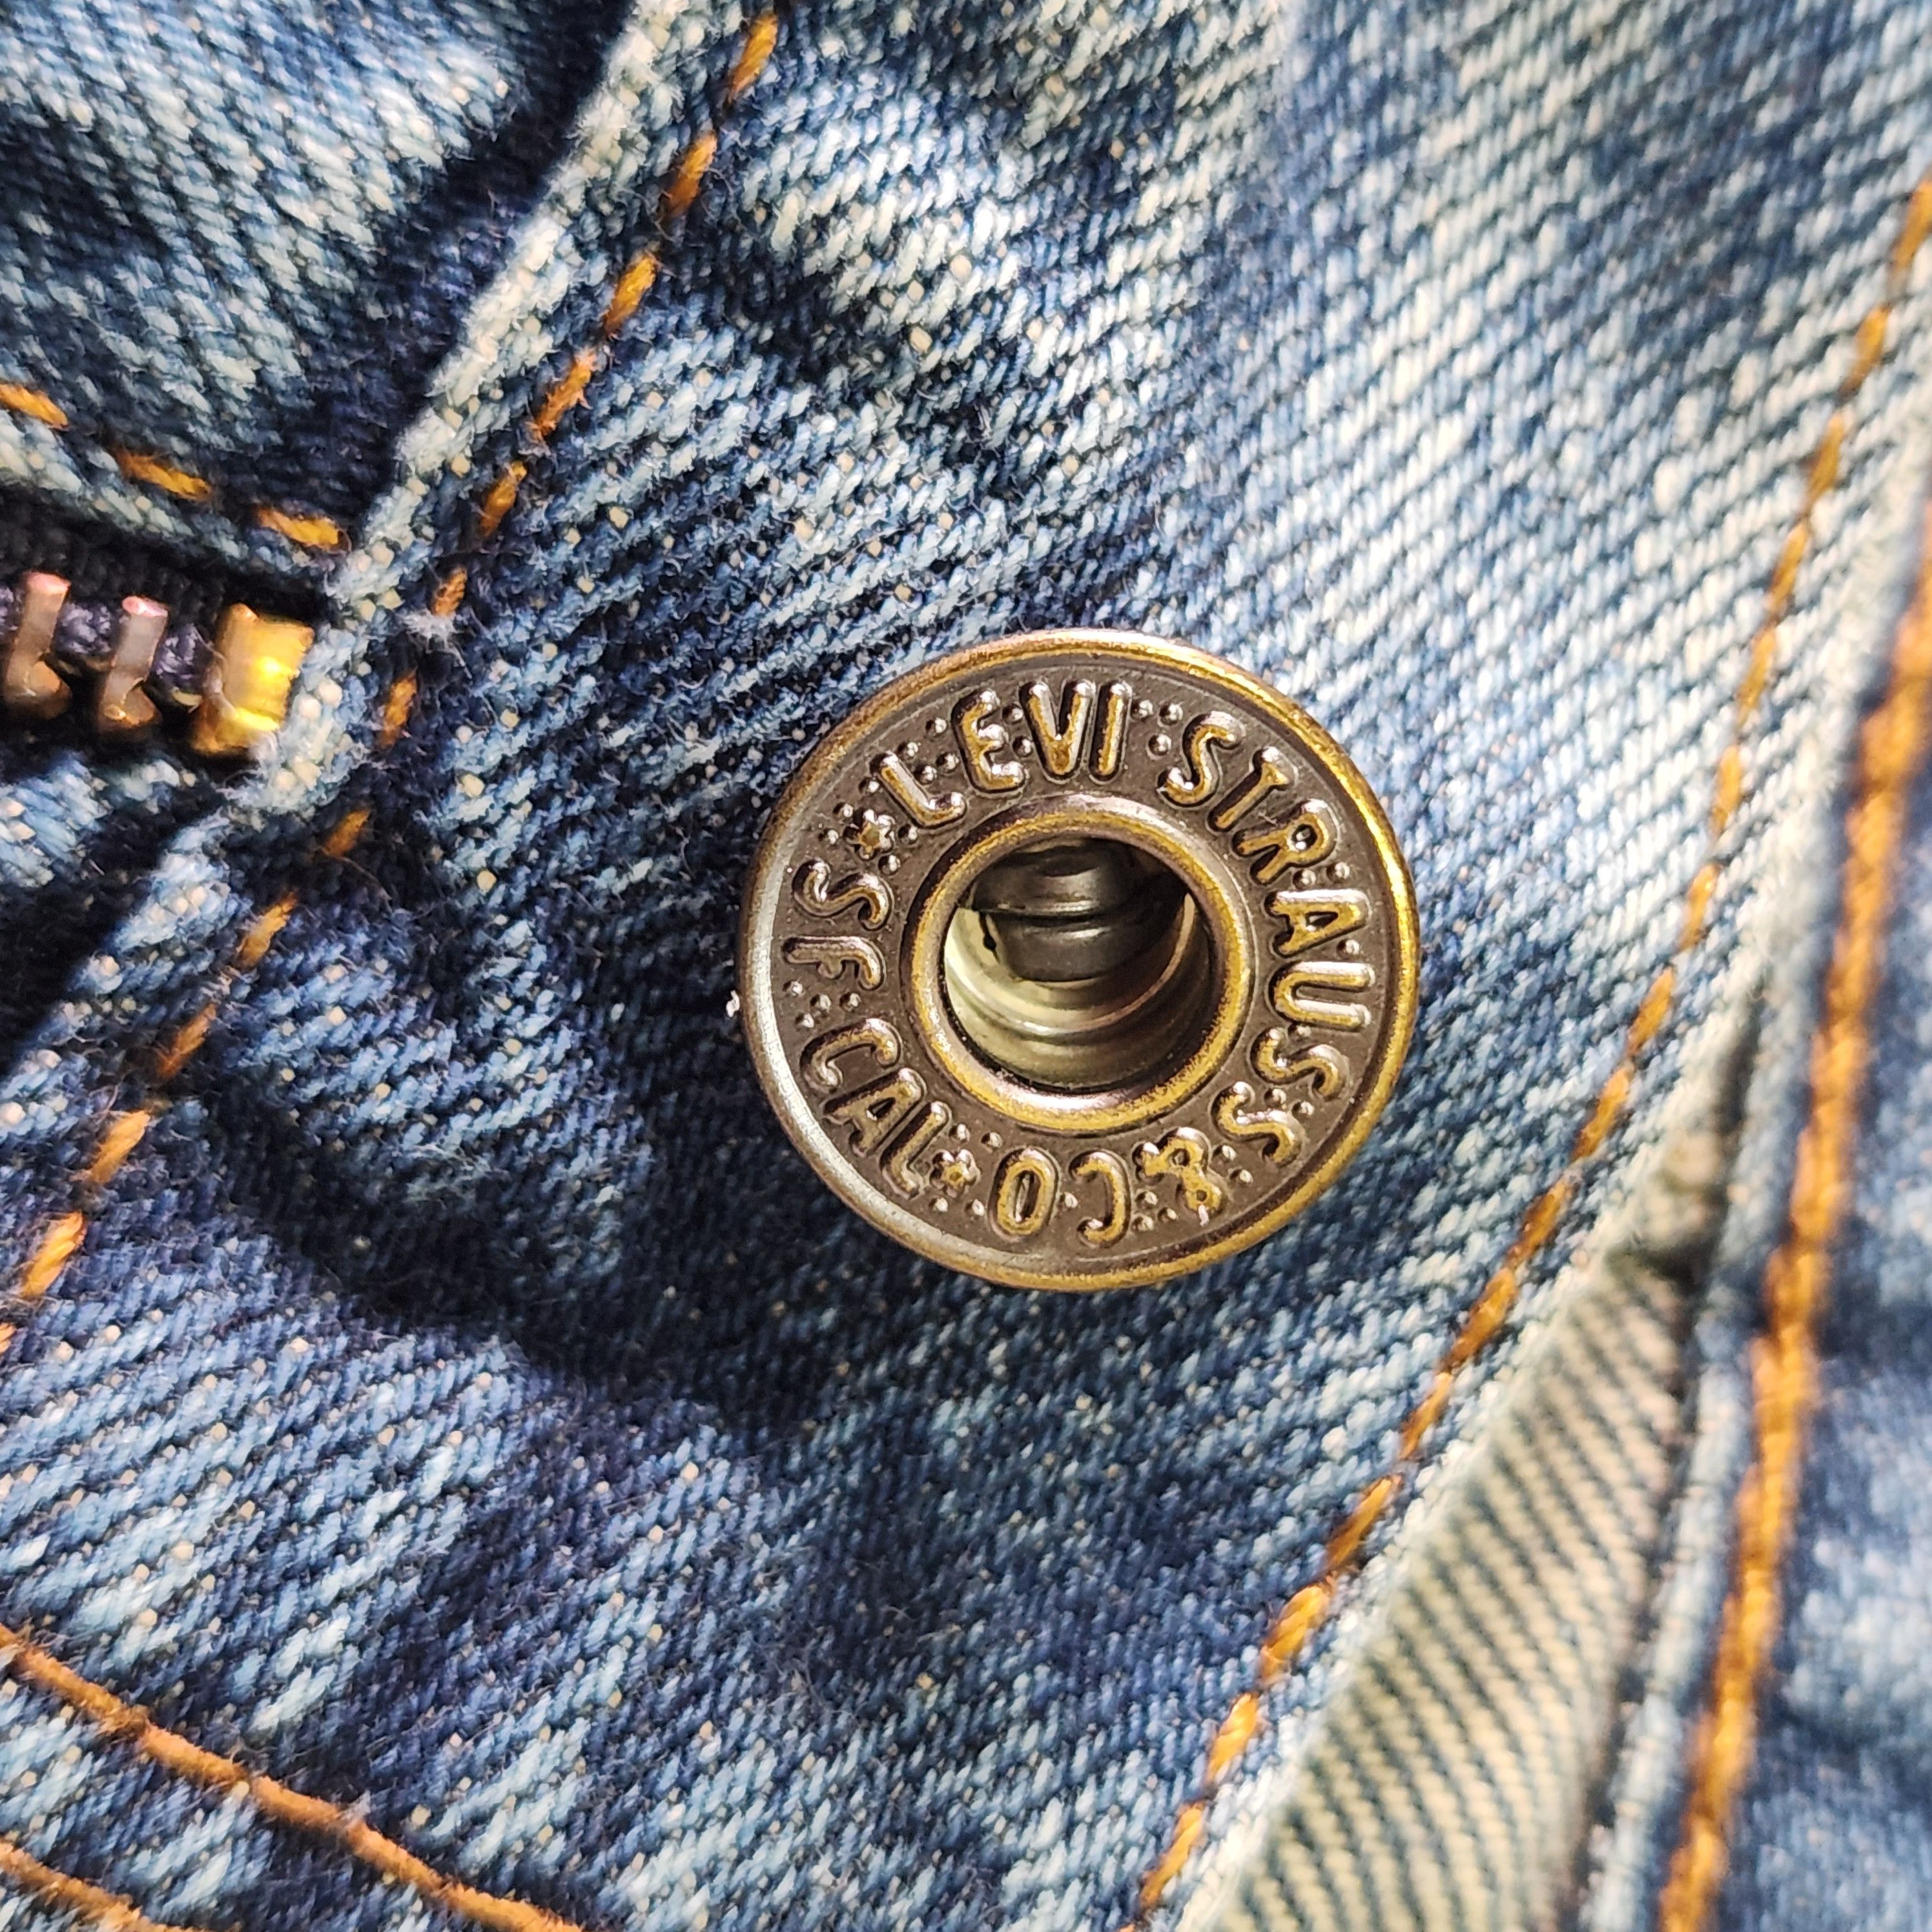 Levis 502 Vintage Distressed Ripped Denim Jeans Year 2002 - 14